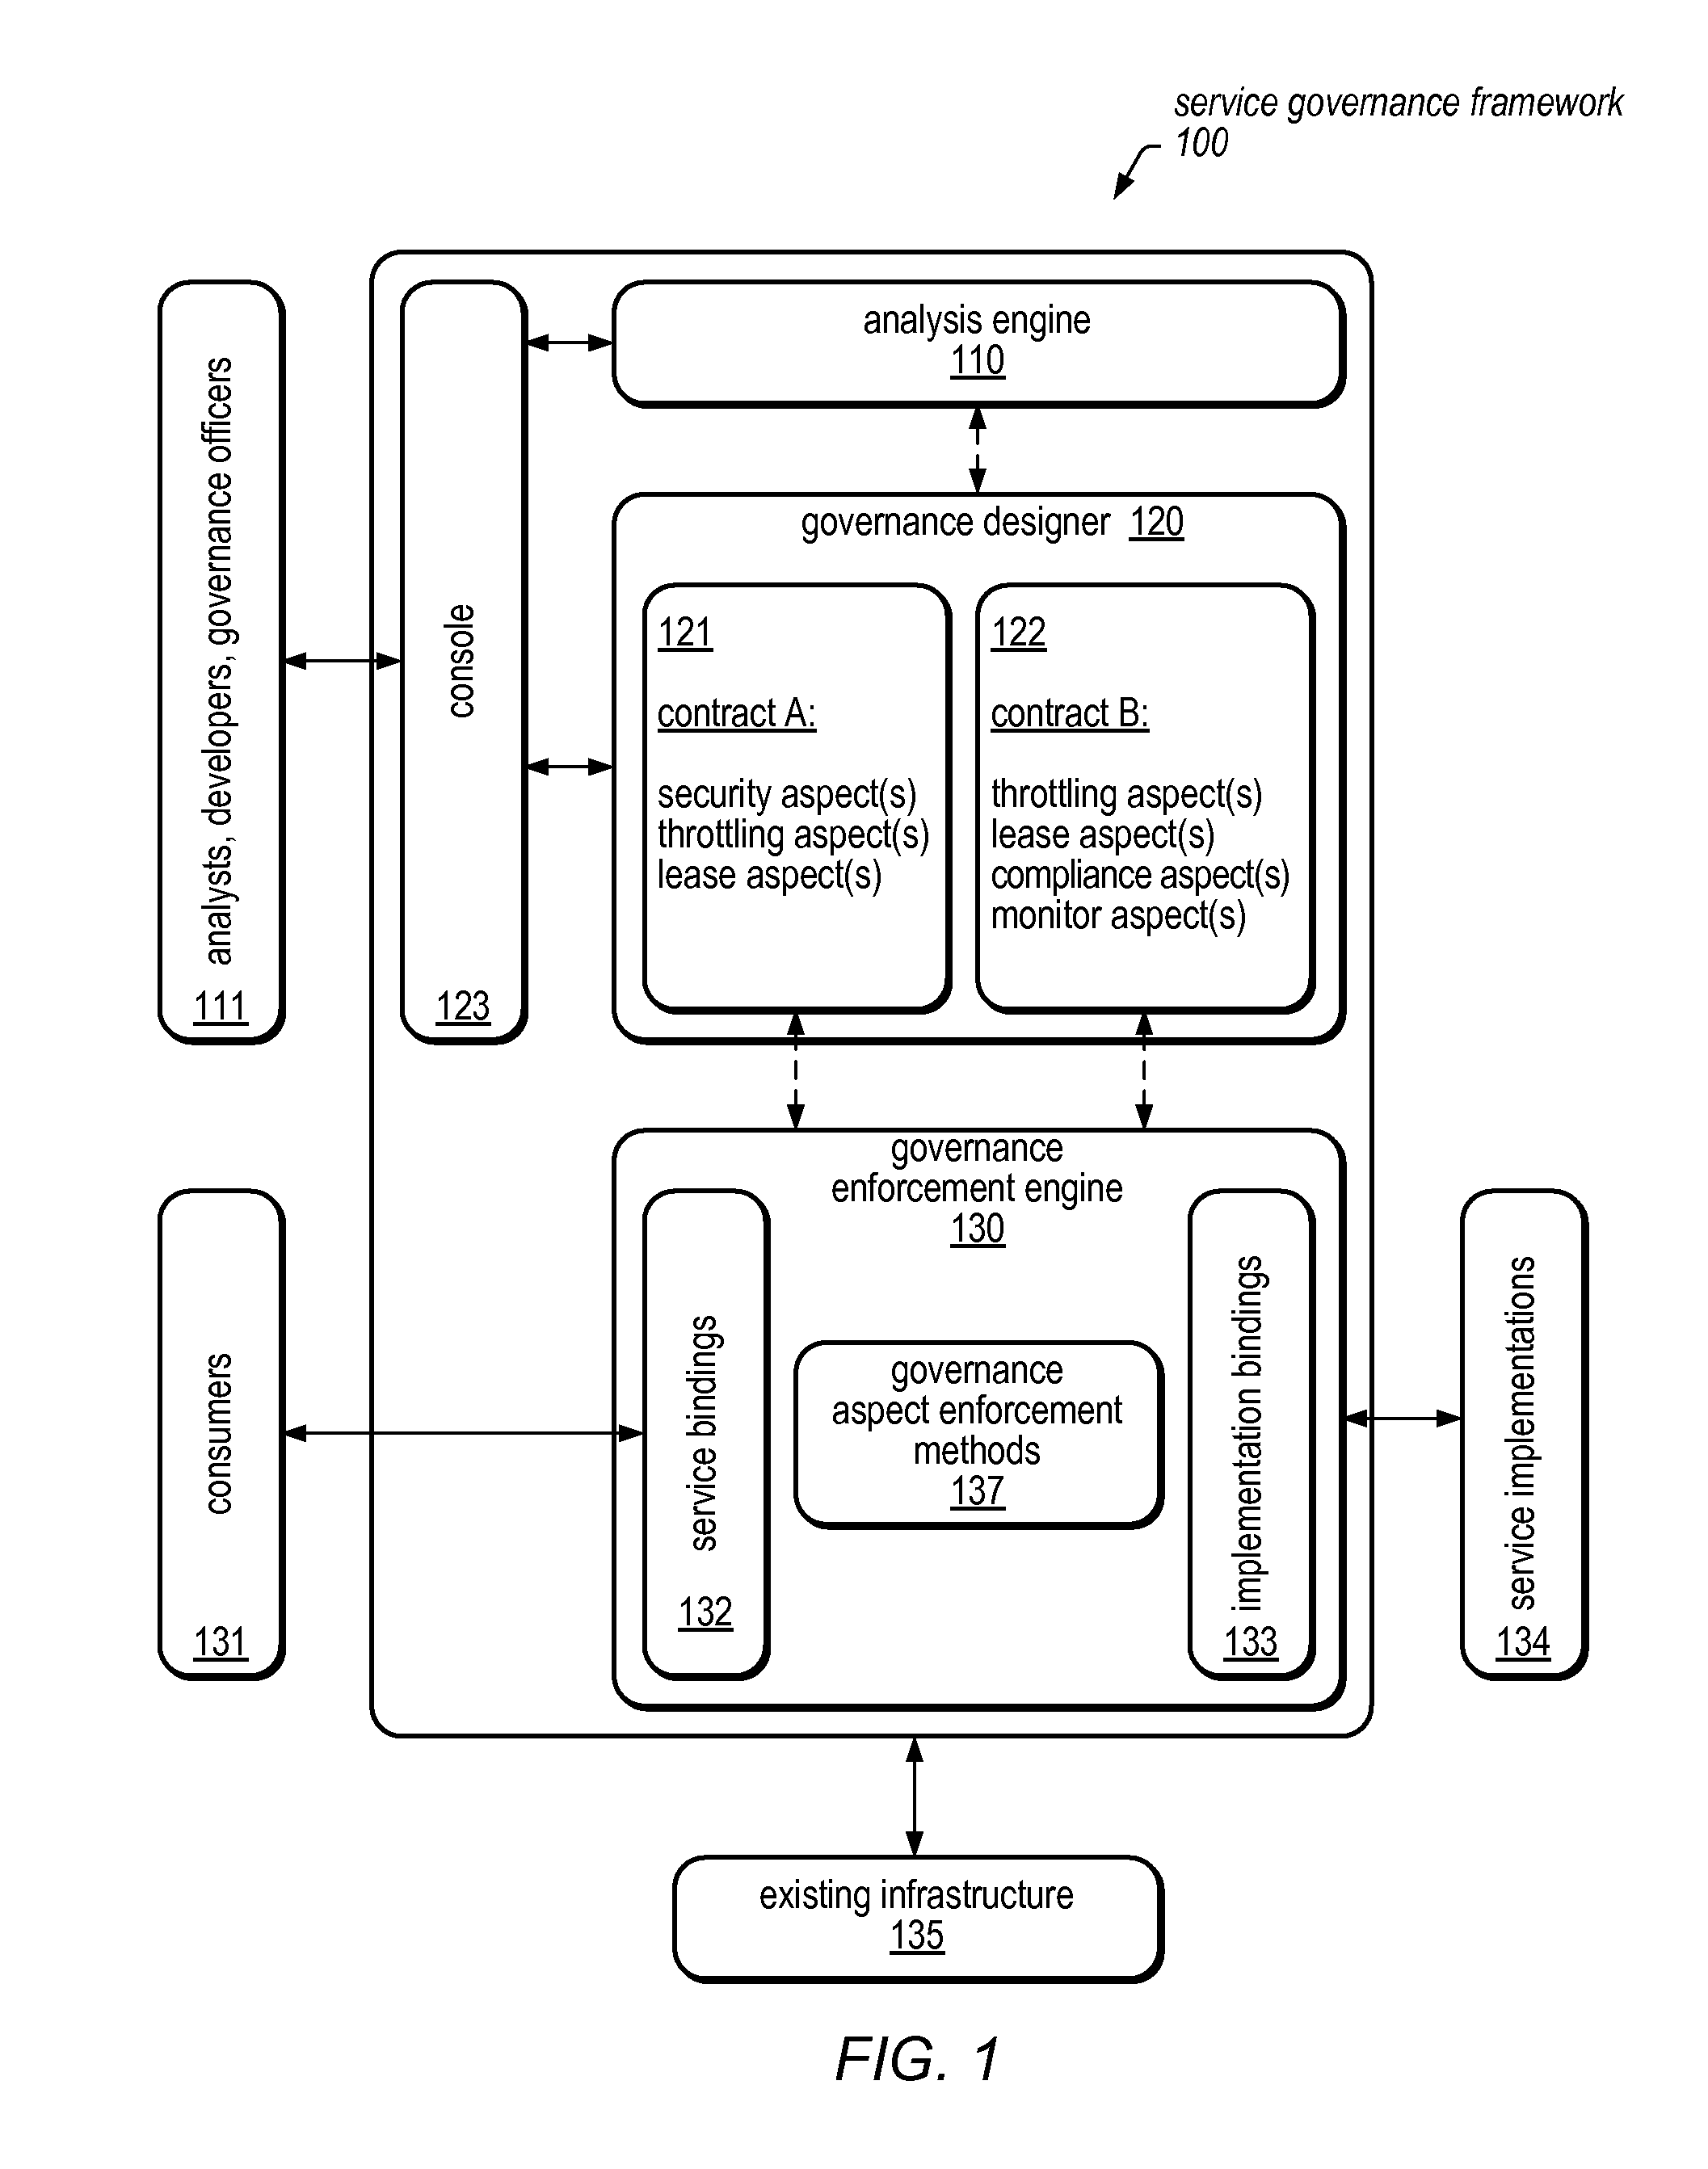 System and method for service virtualization in a service governance framework